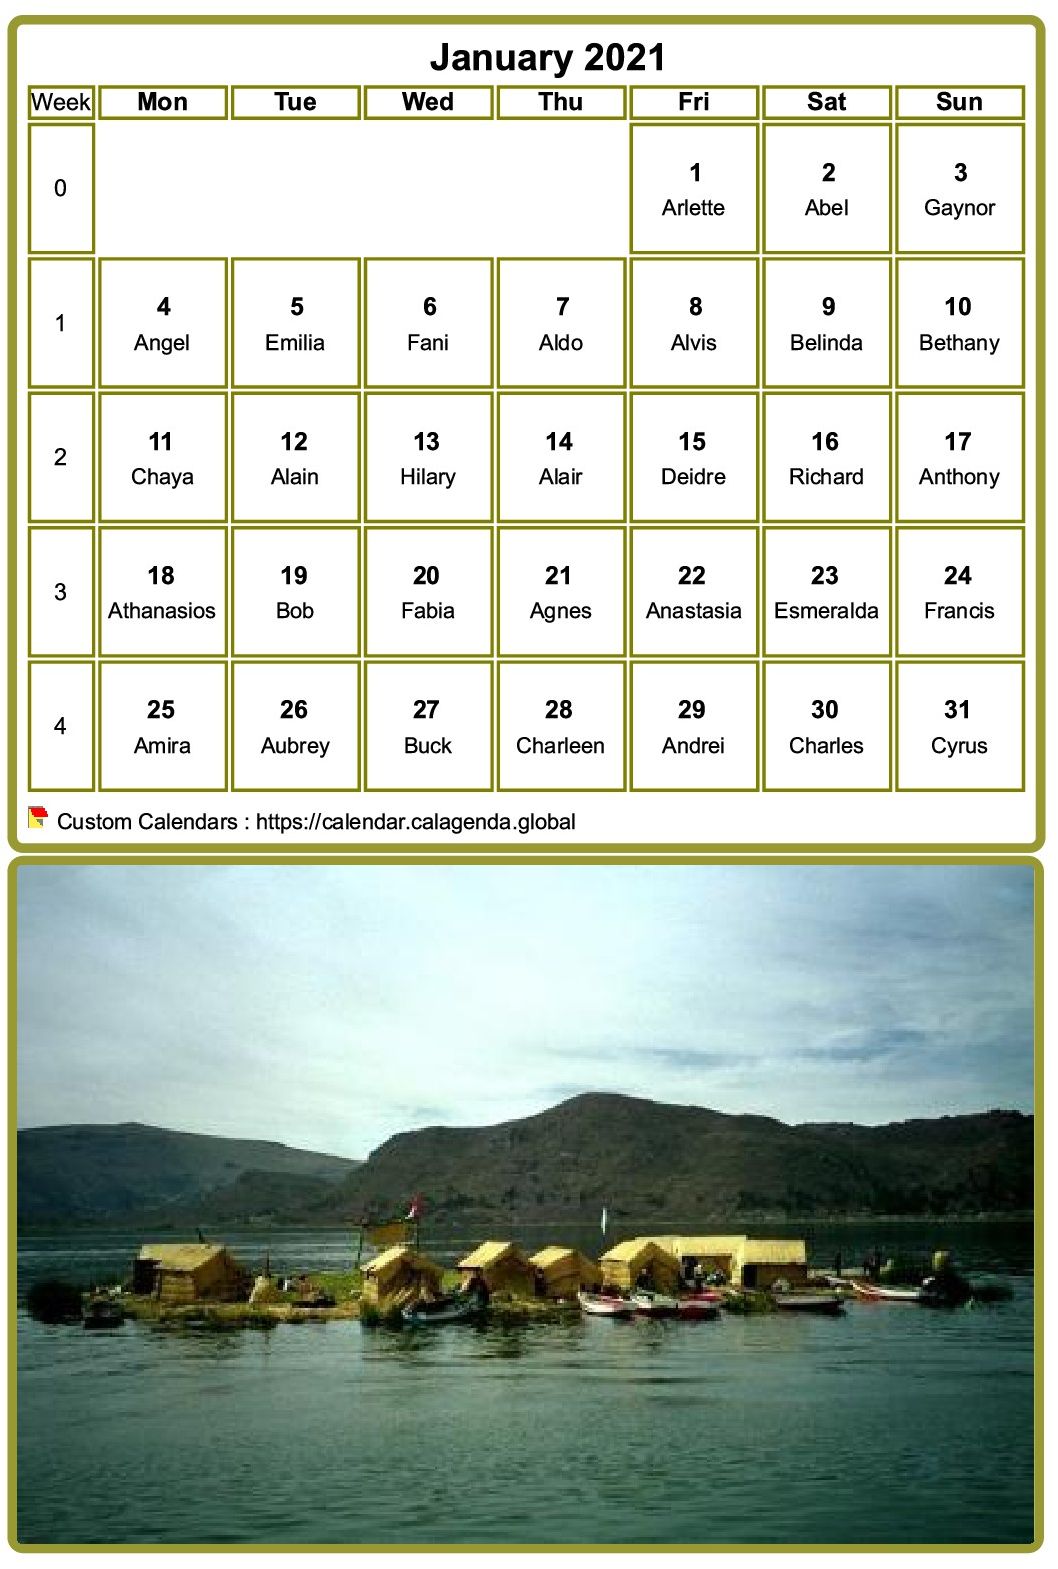 Calendar monthly 2021, table with photo